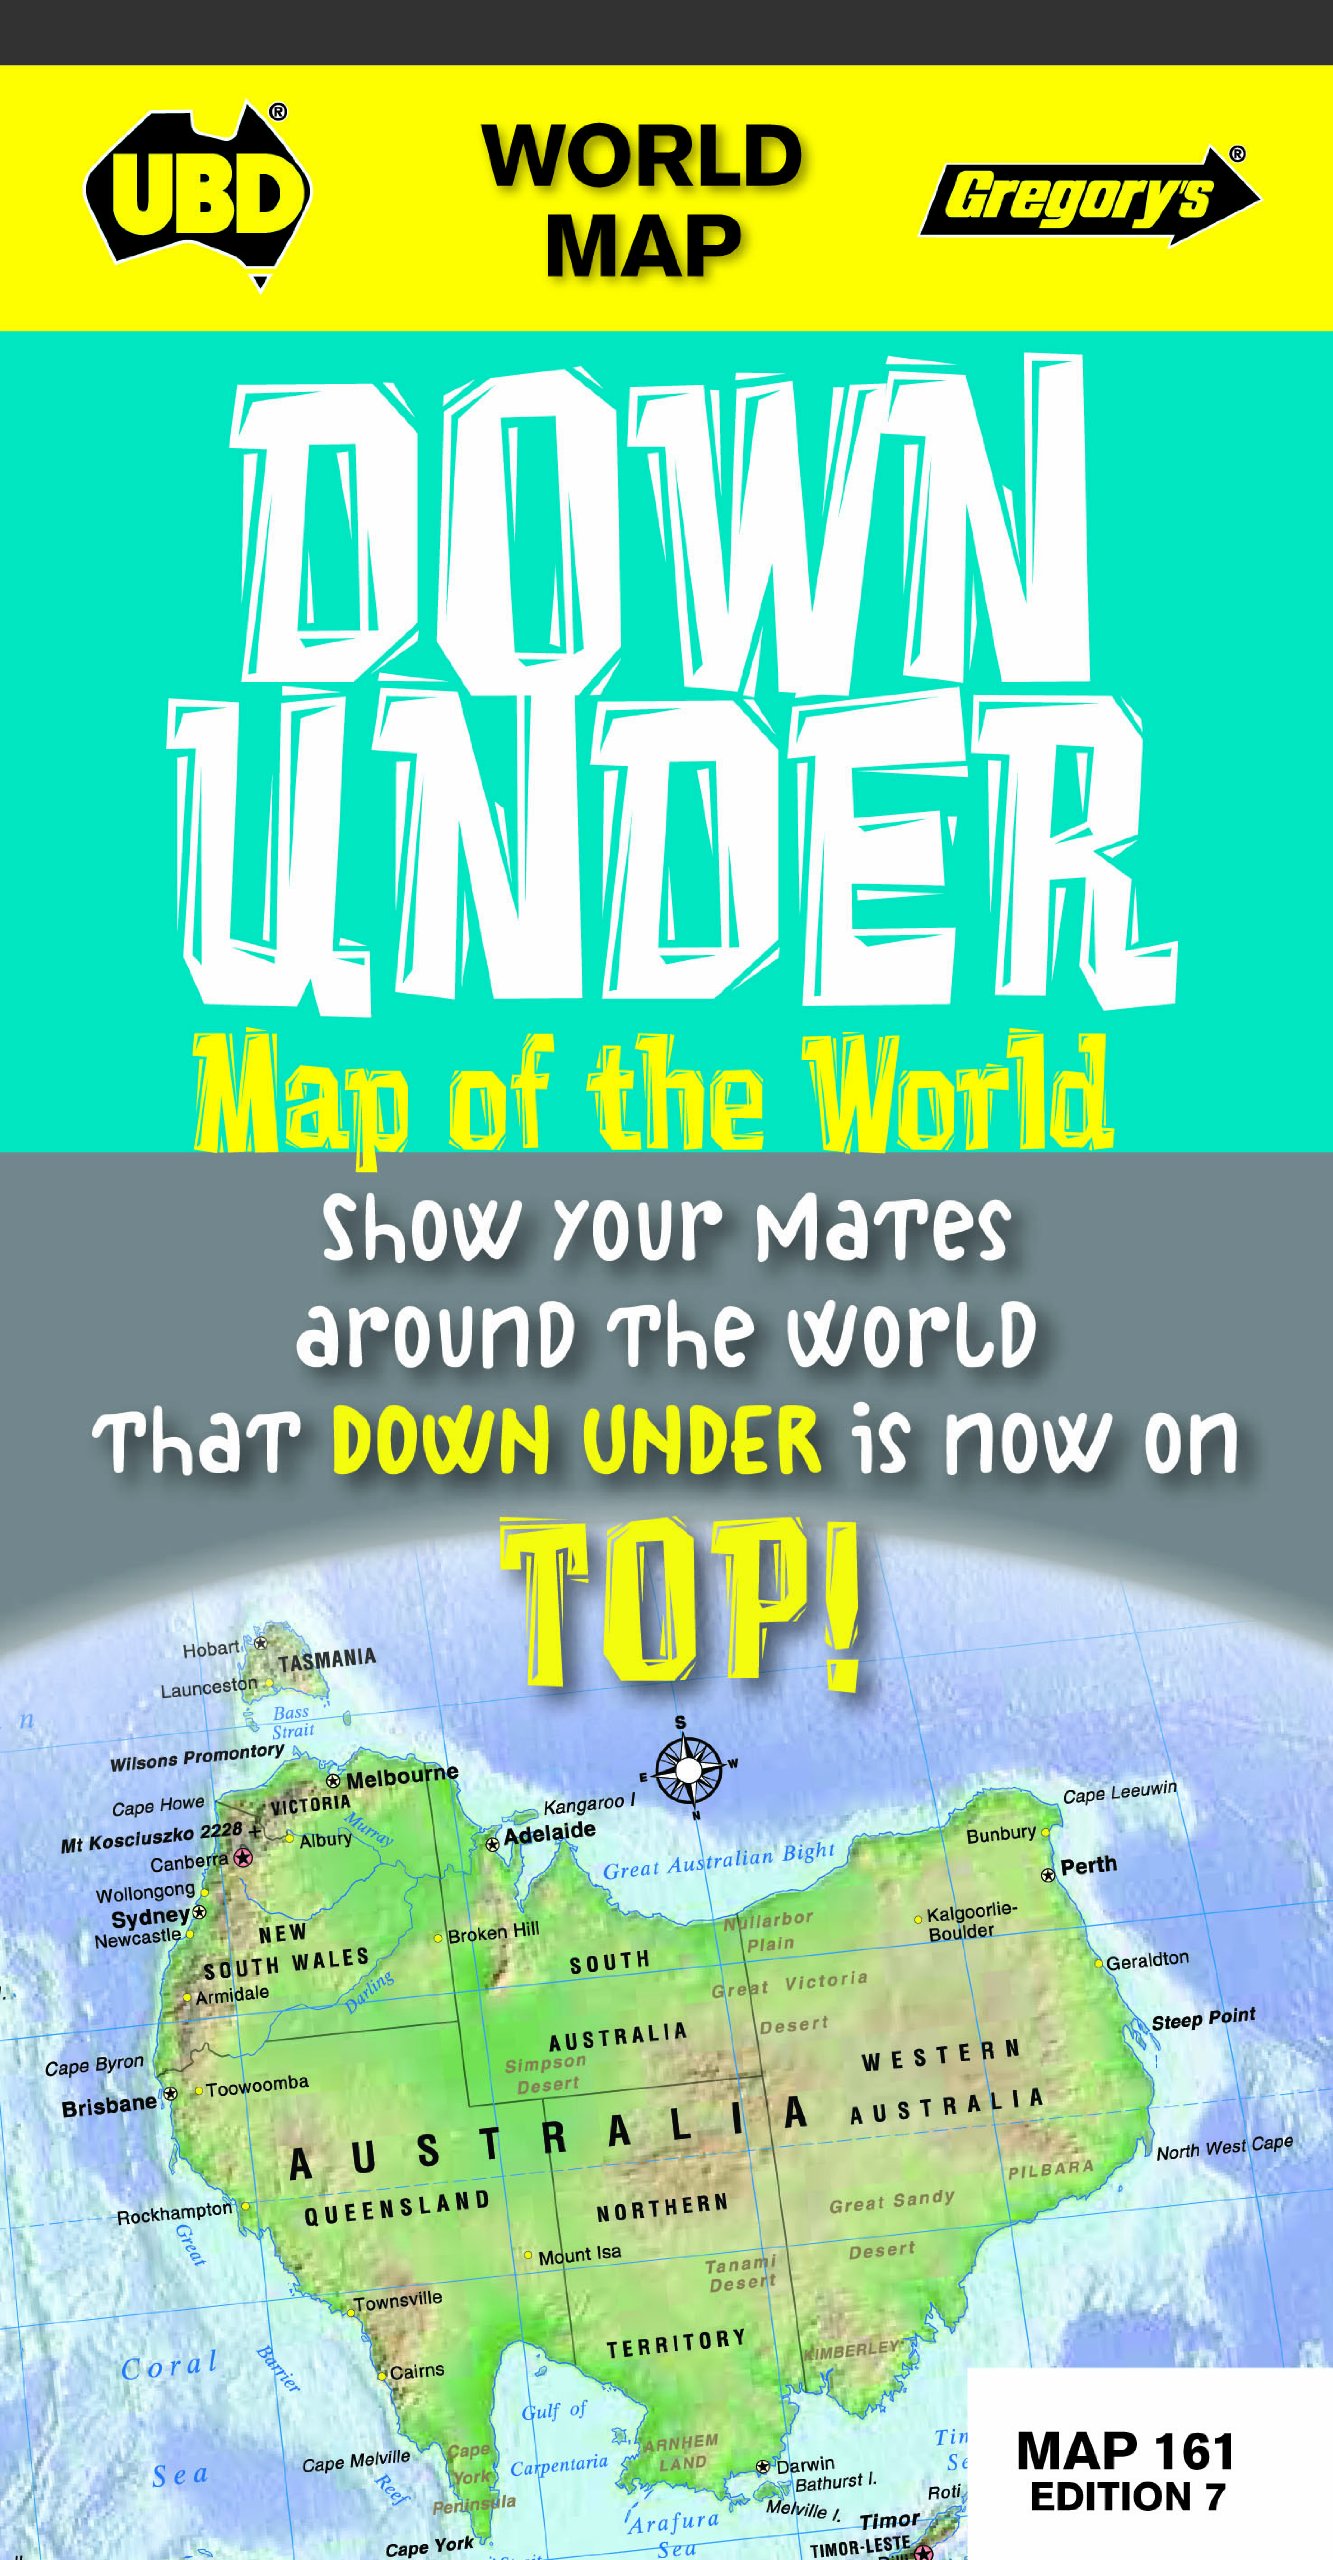 Down Under Map of the World - Map 161 (UBD Gregory's)